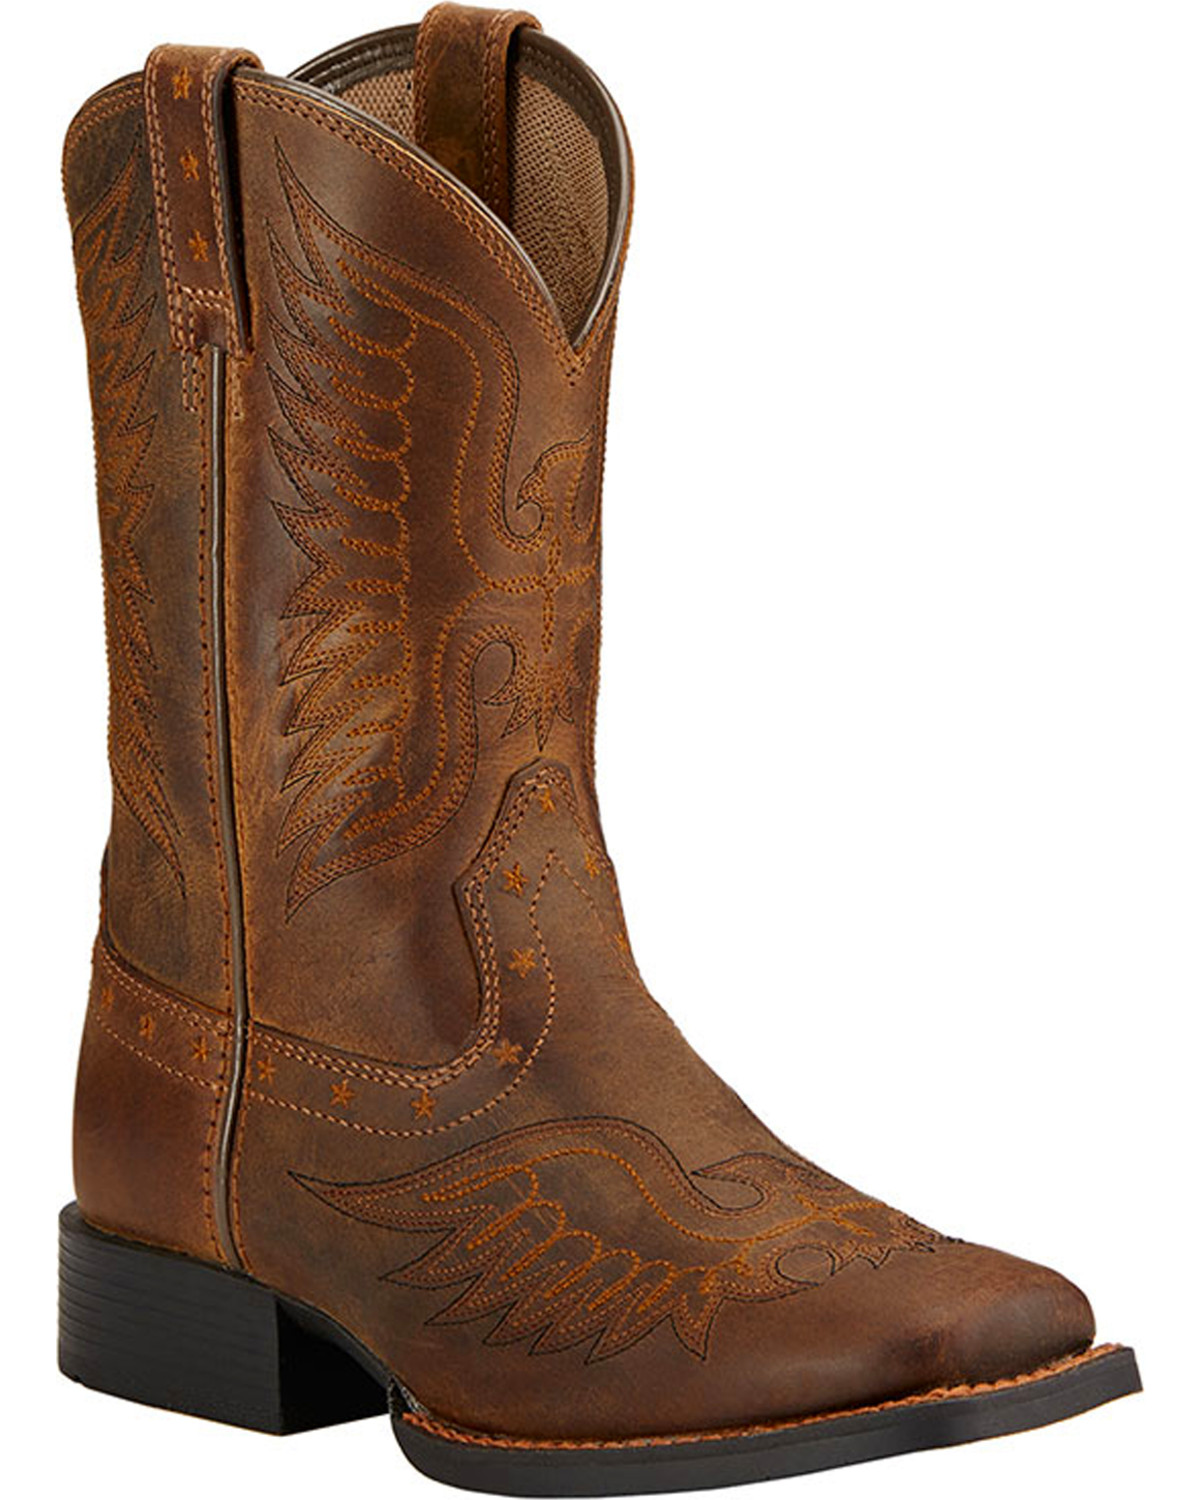 Ariat Boys' Honor Western Boots